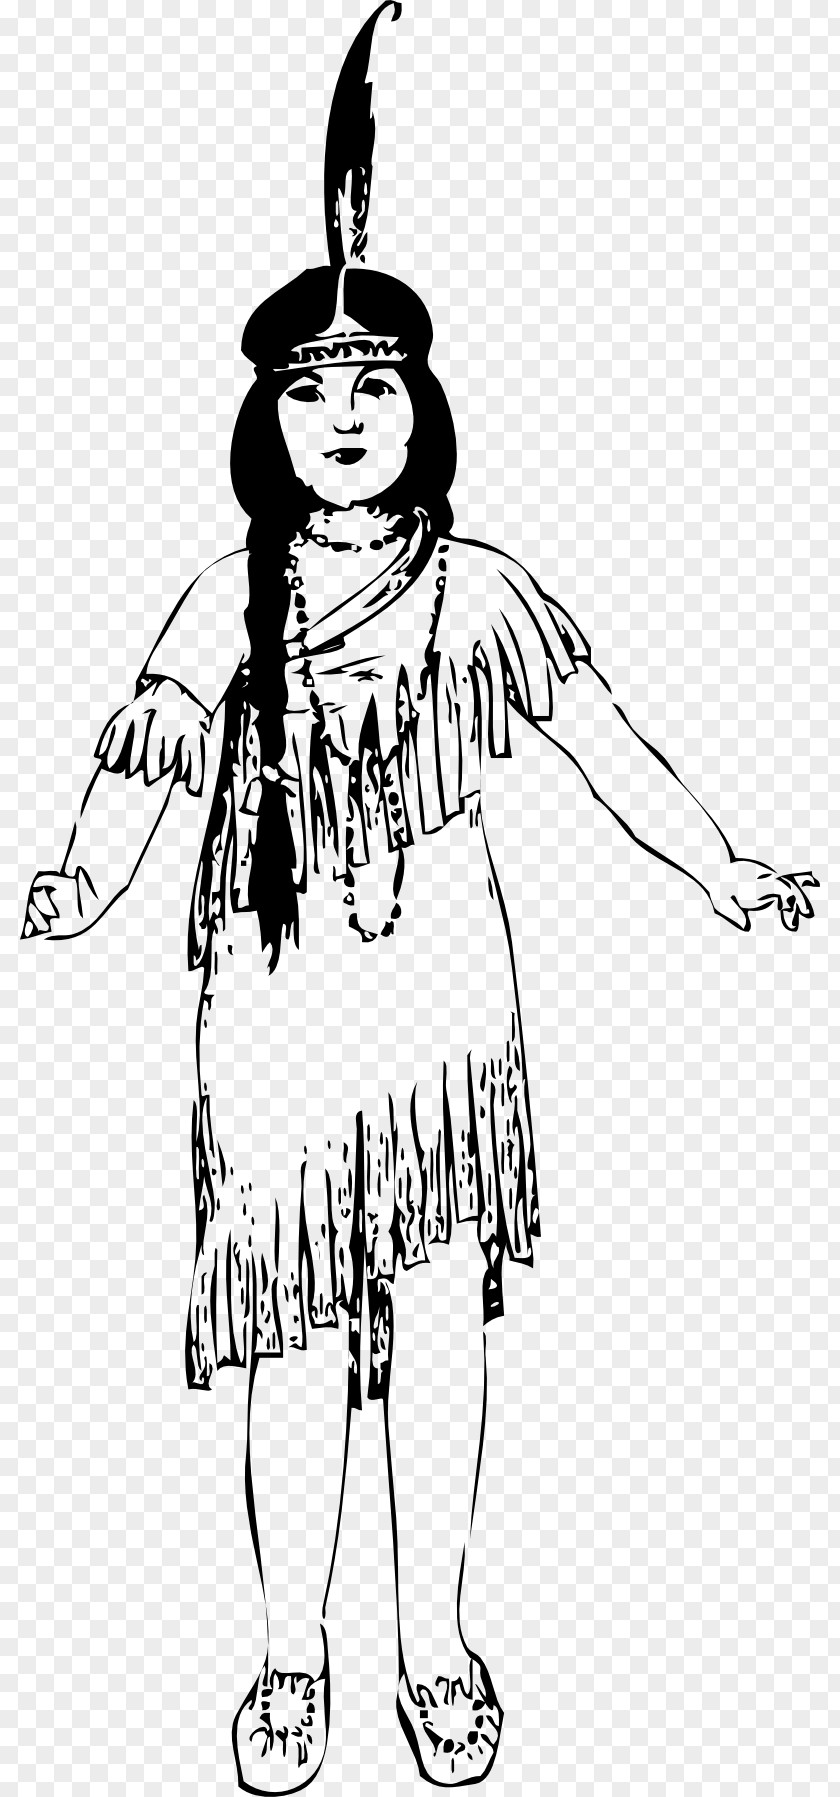 Native Americans In The United States Indigenous Peoples Of Americas Tipi Tribe PNG in the peoples of , indian girl clipart PNG